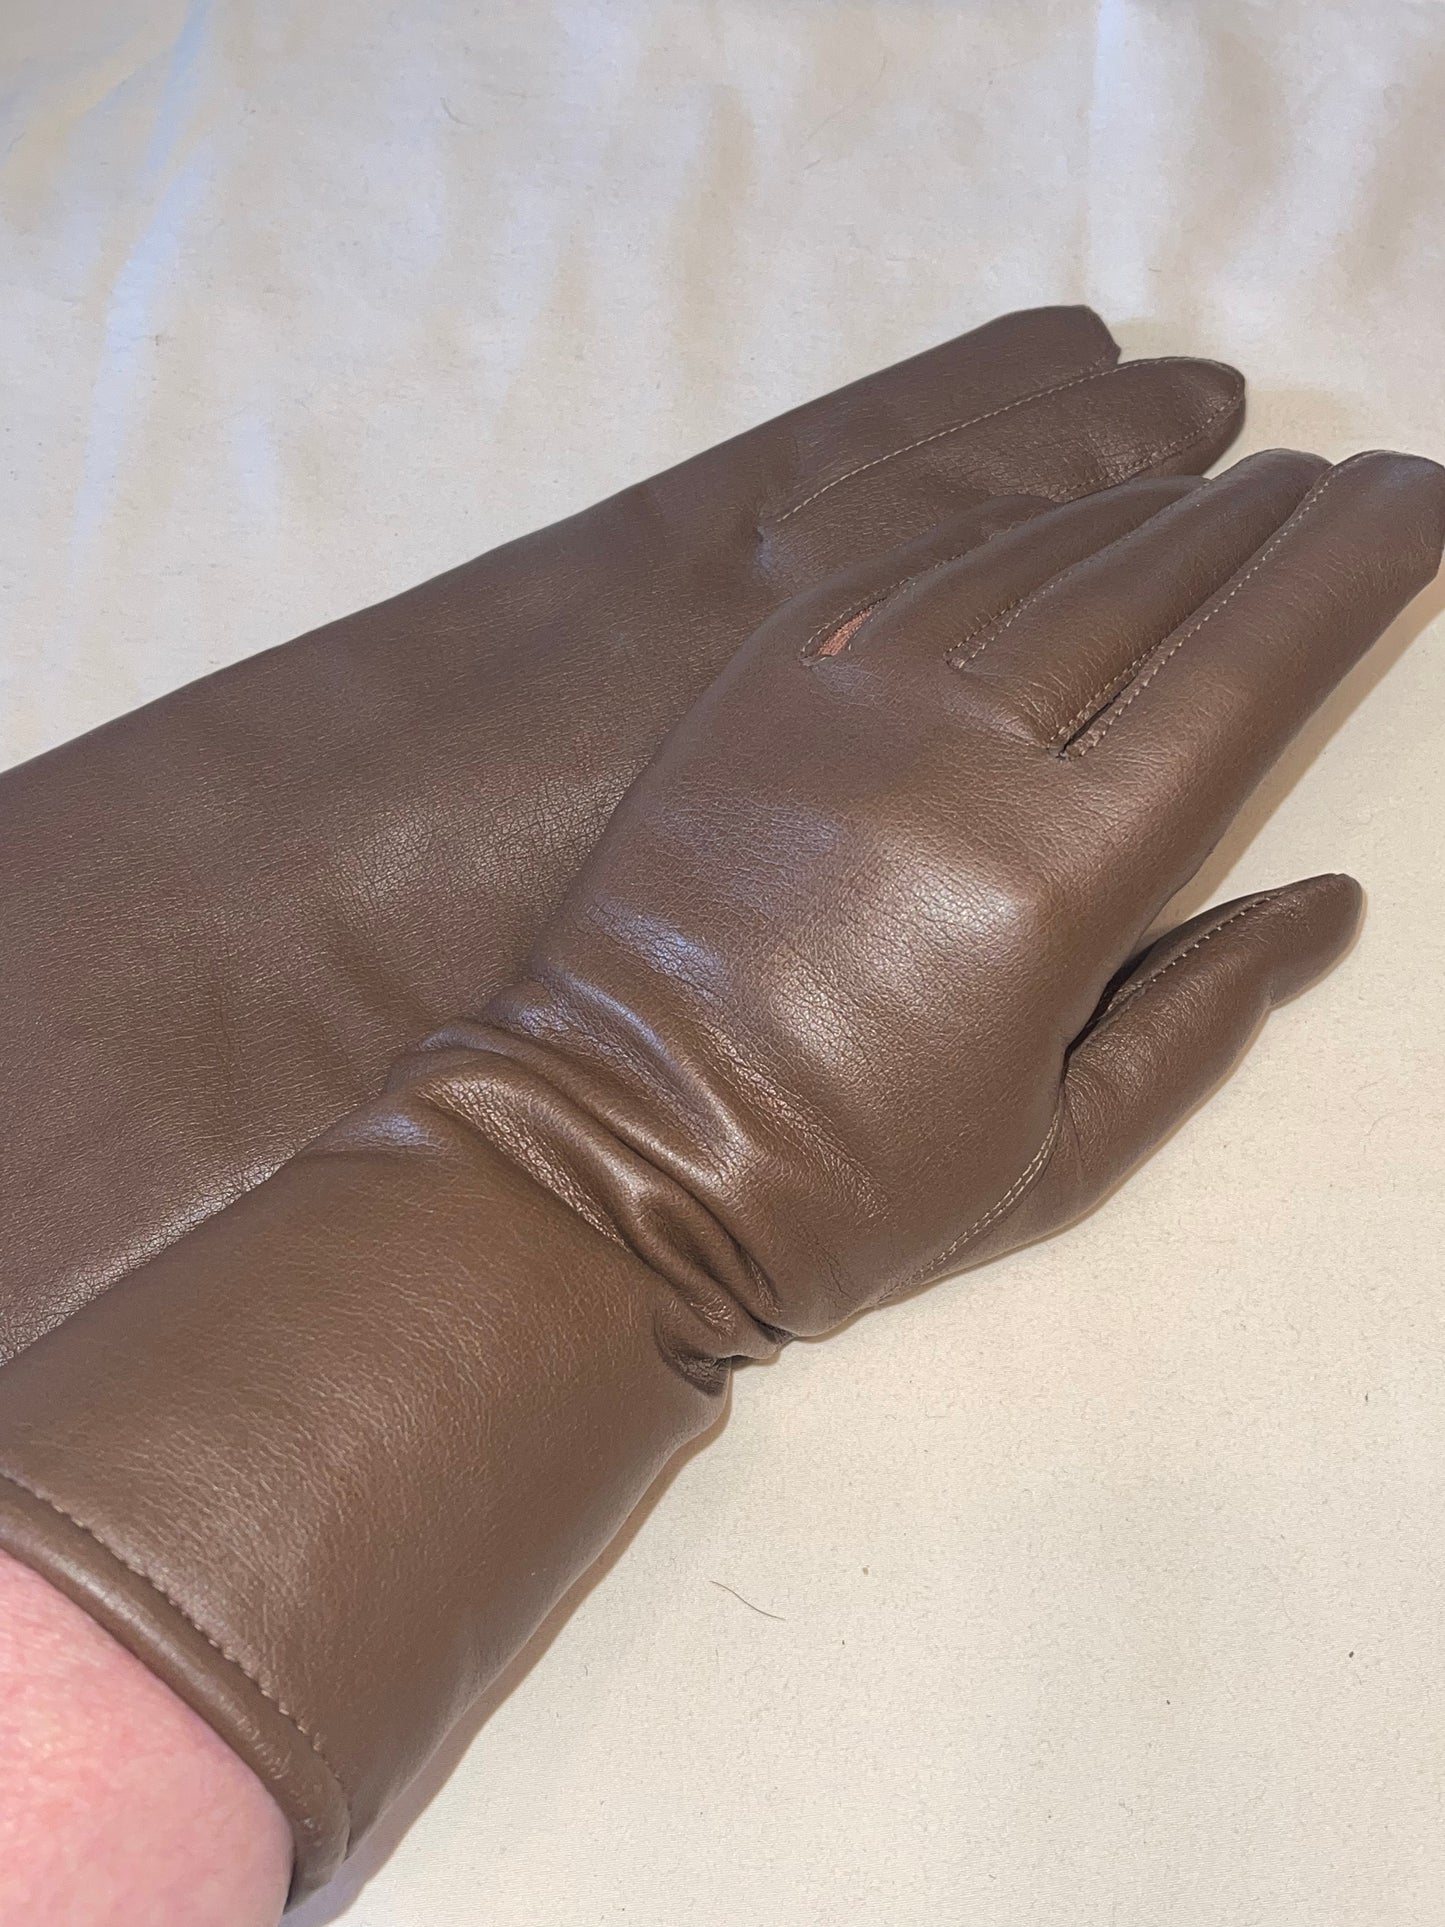 Faux Leather Rabbit Lined Gloves